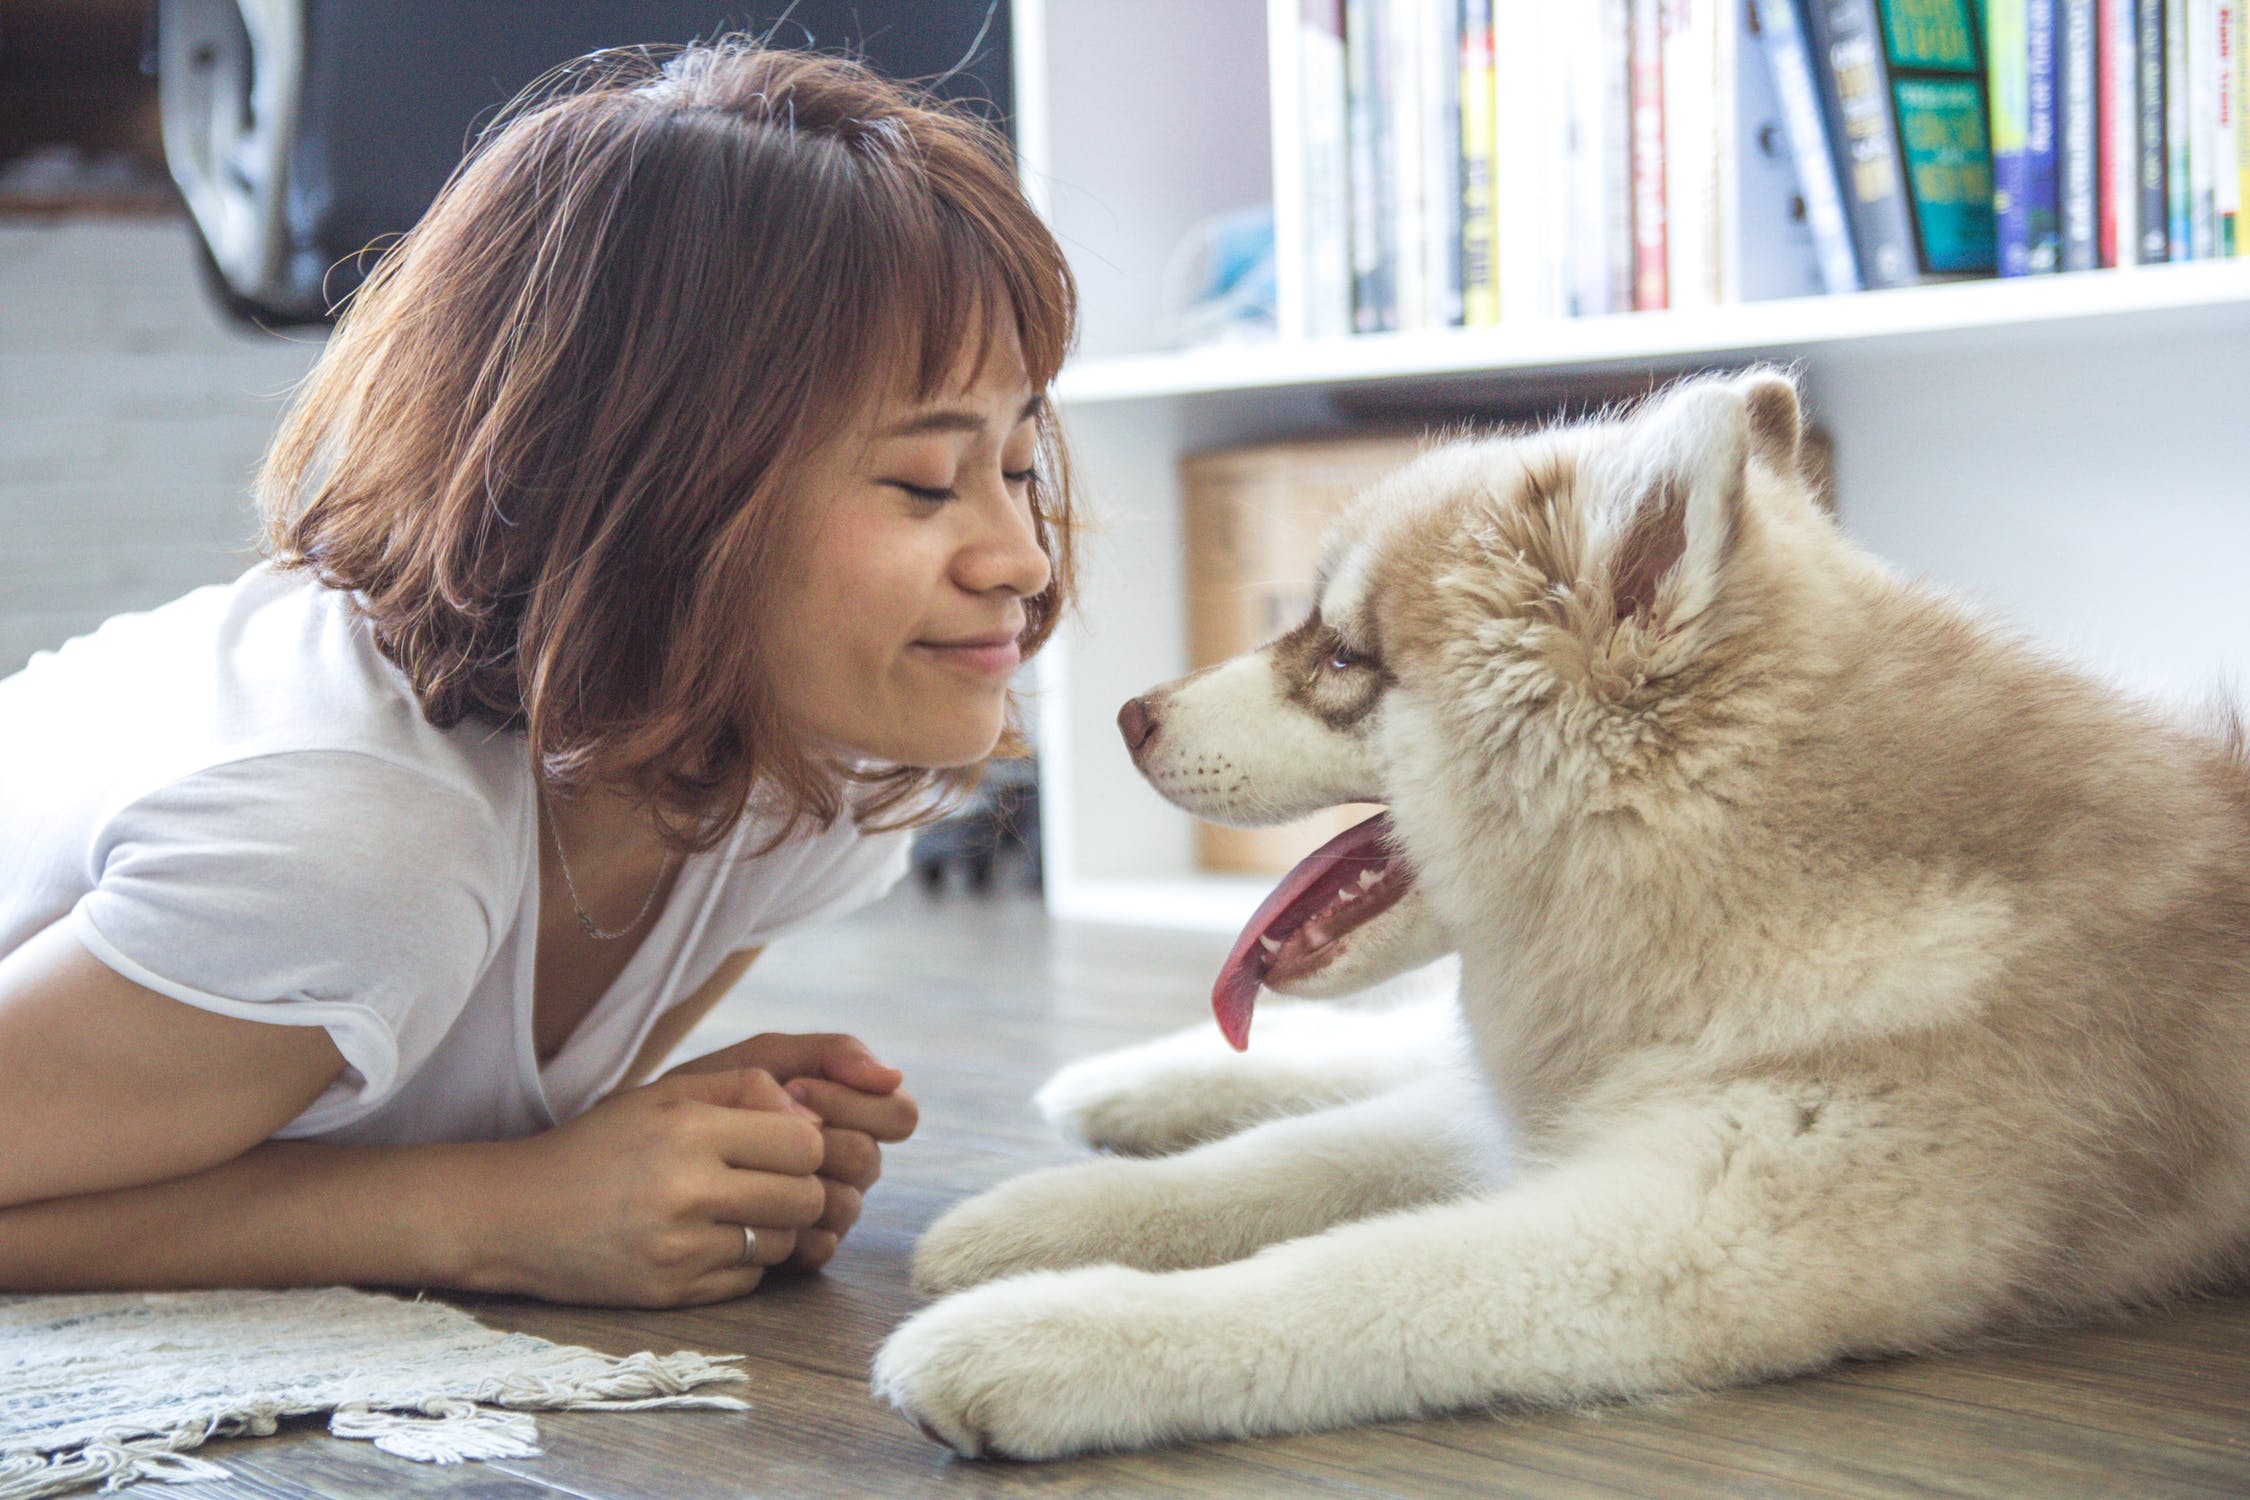 5 Benefits to having an emotional support animal